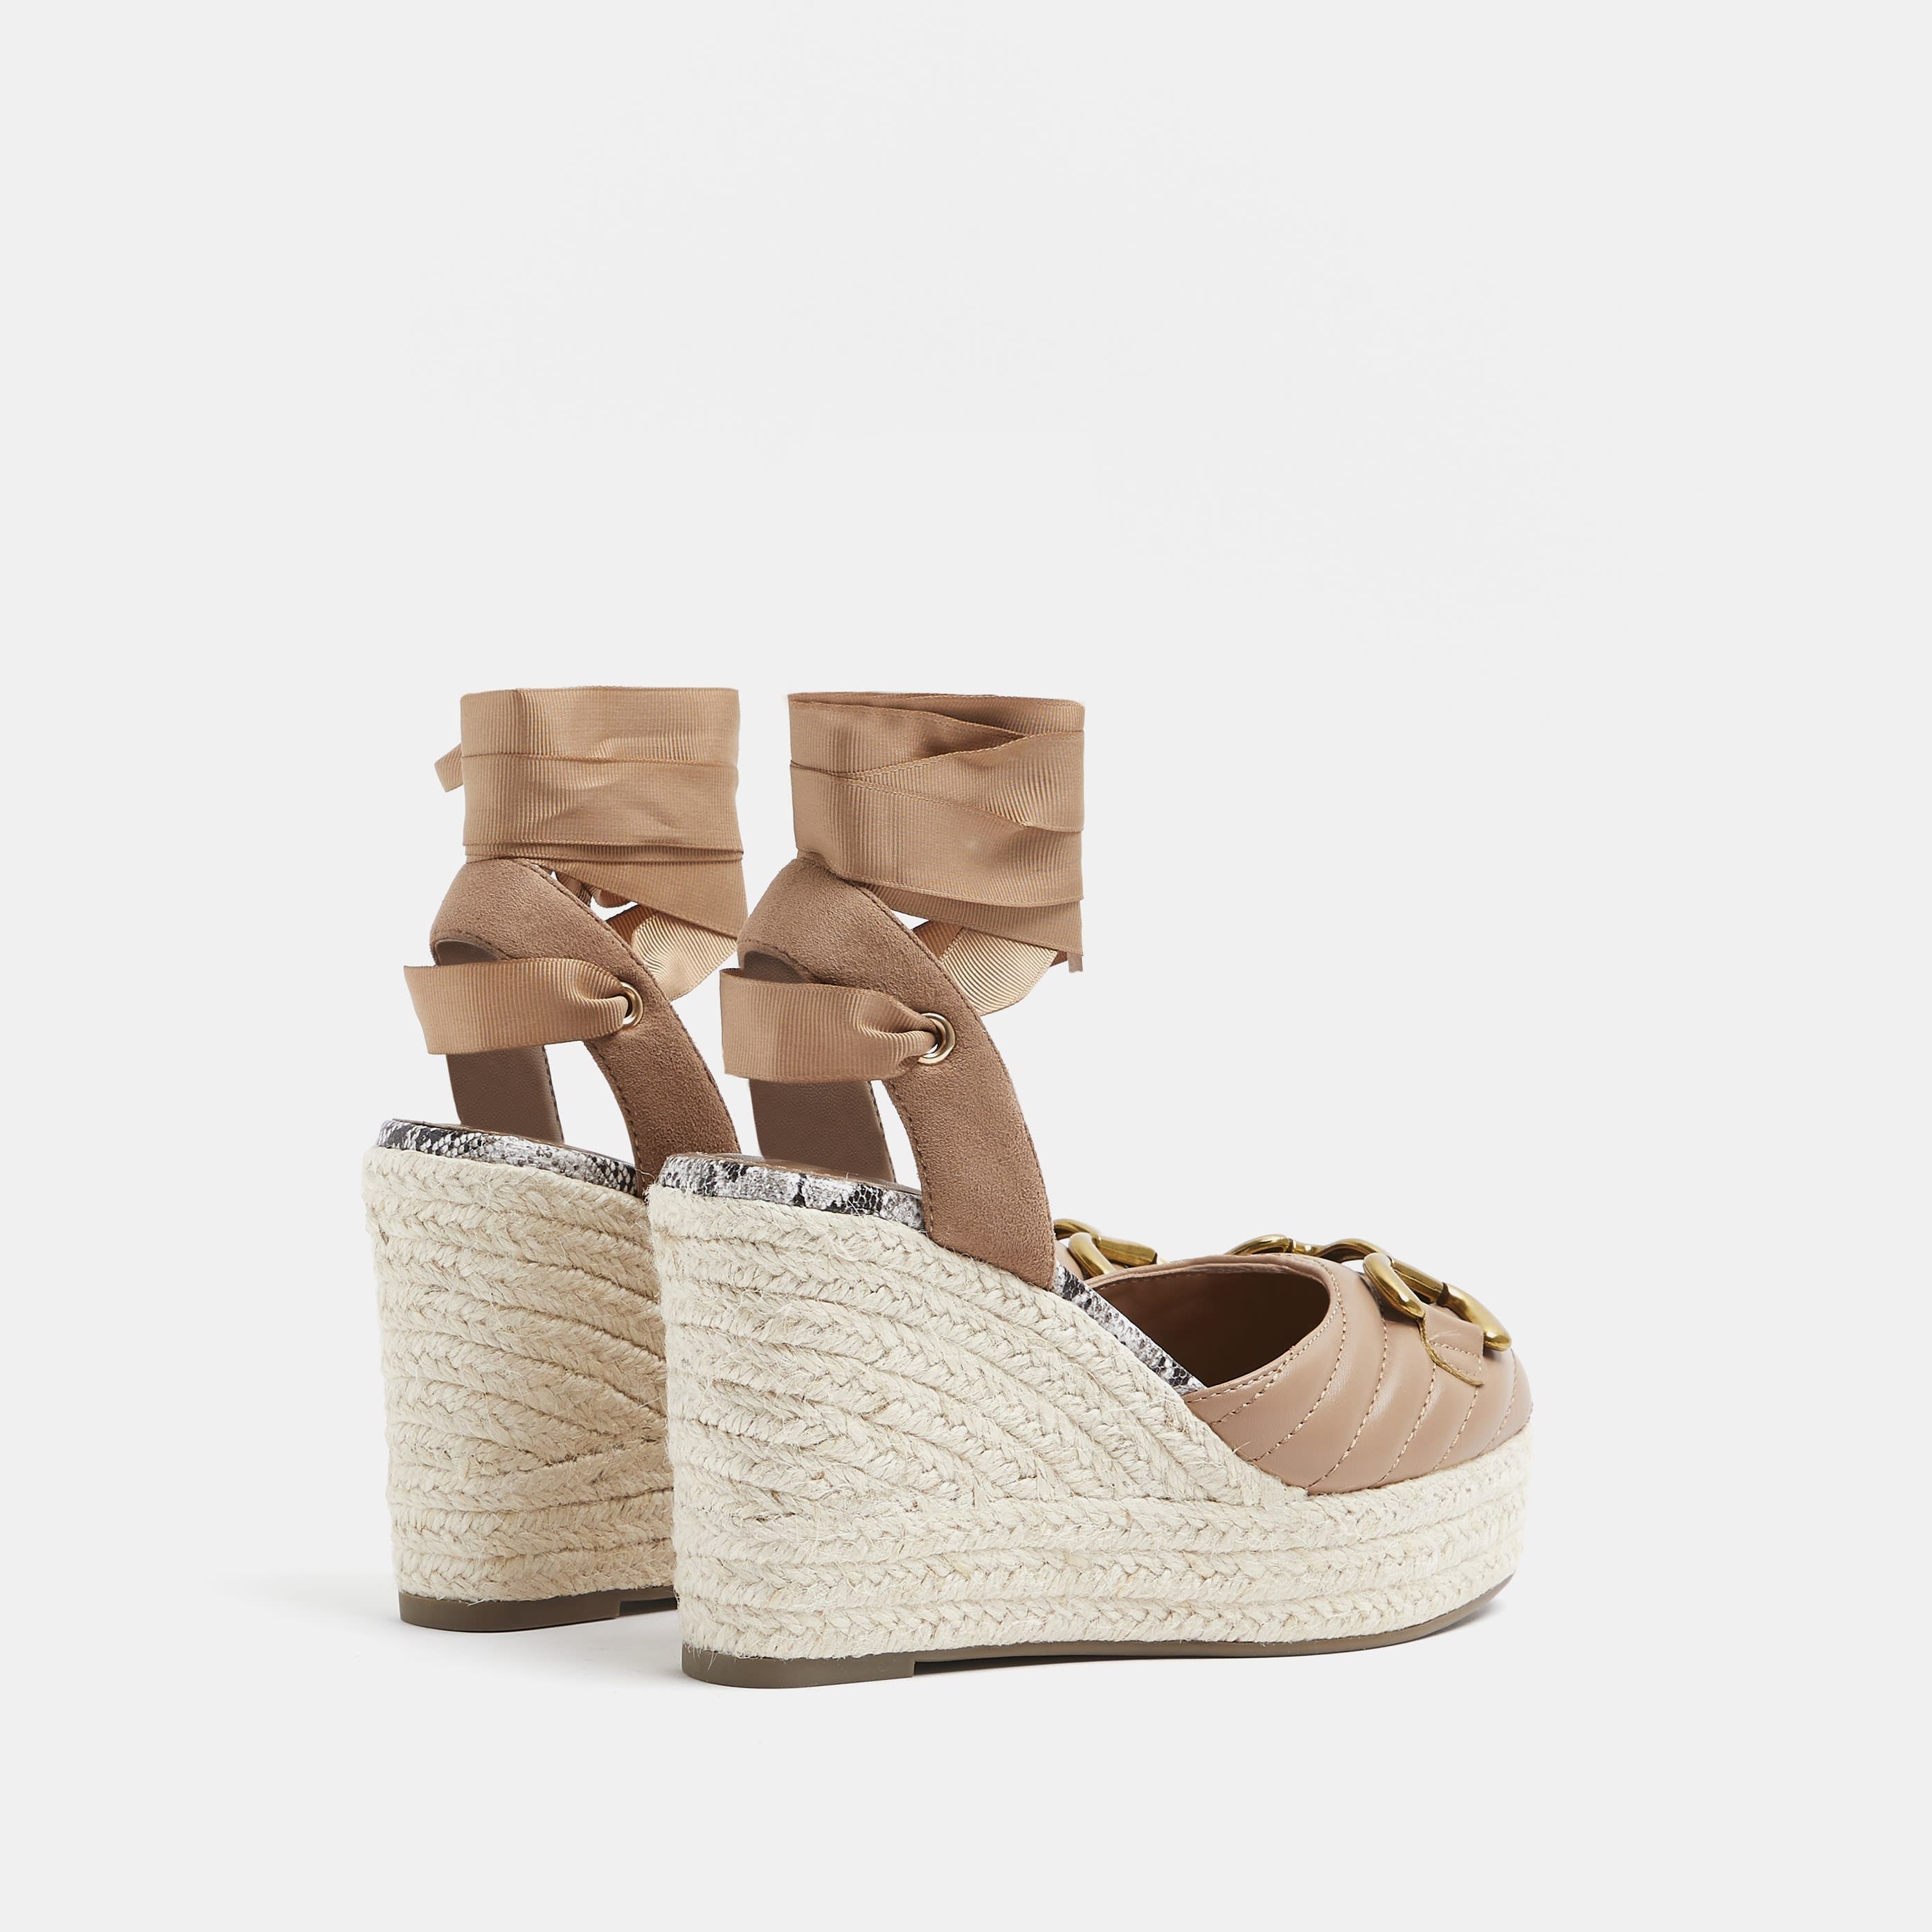 > Brand: River Island> Department: Women> Colour: Beige> Type: Sandal> Style: Wedge> Material Composition: Upper: Textile, Sole: Rubber> Upper Material: Textile> Pattern: No Pattern> Occasion: Casual> Shoe Width: Standard> Toe Shape: Open Toe> Heel Height: High (7.6-10 cm)> Season: SS22